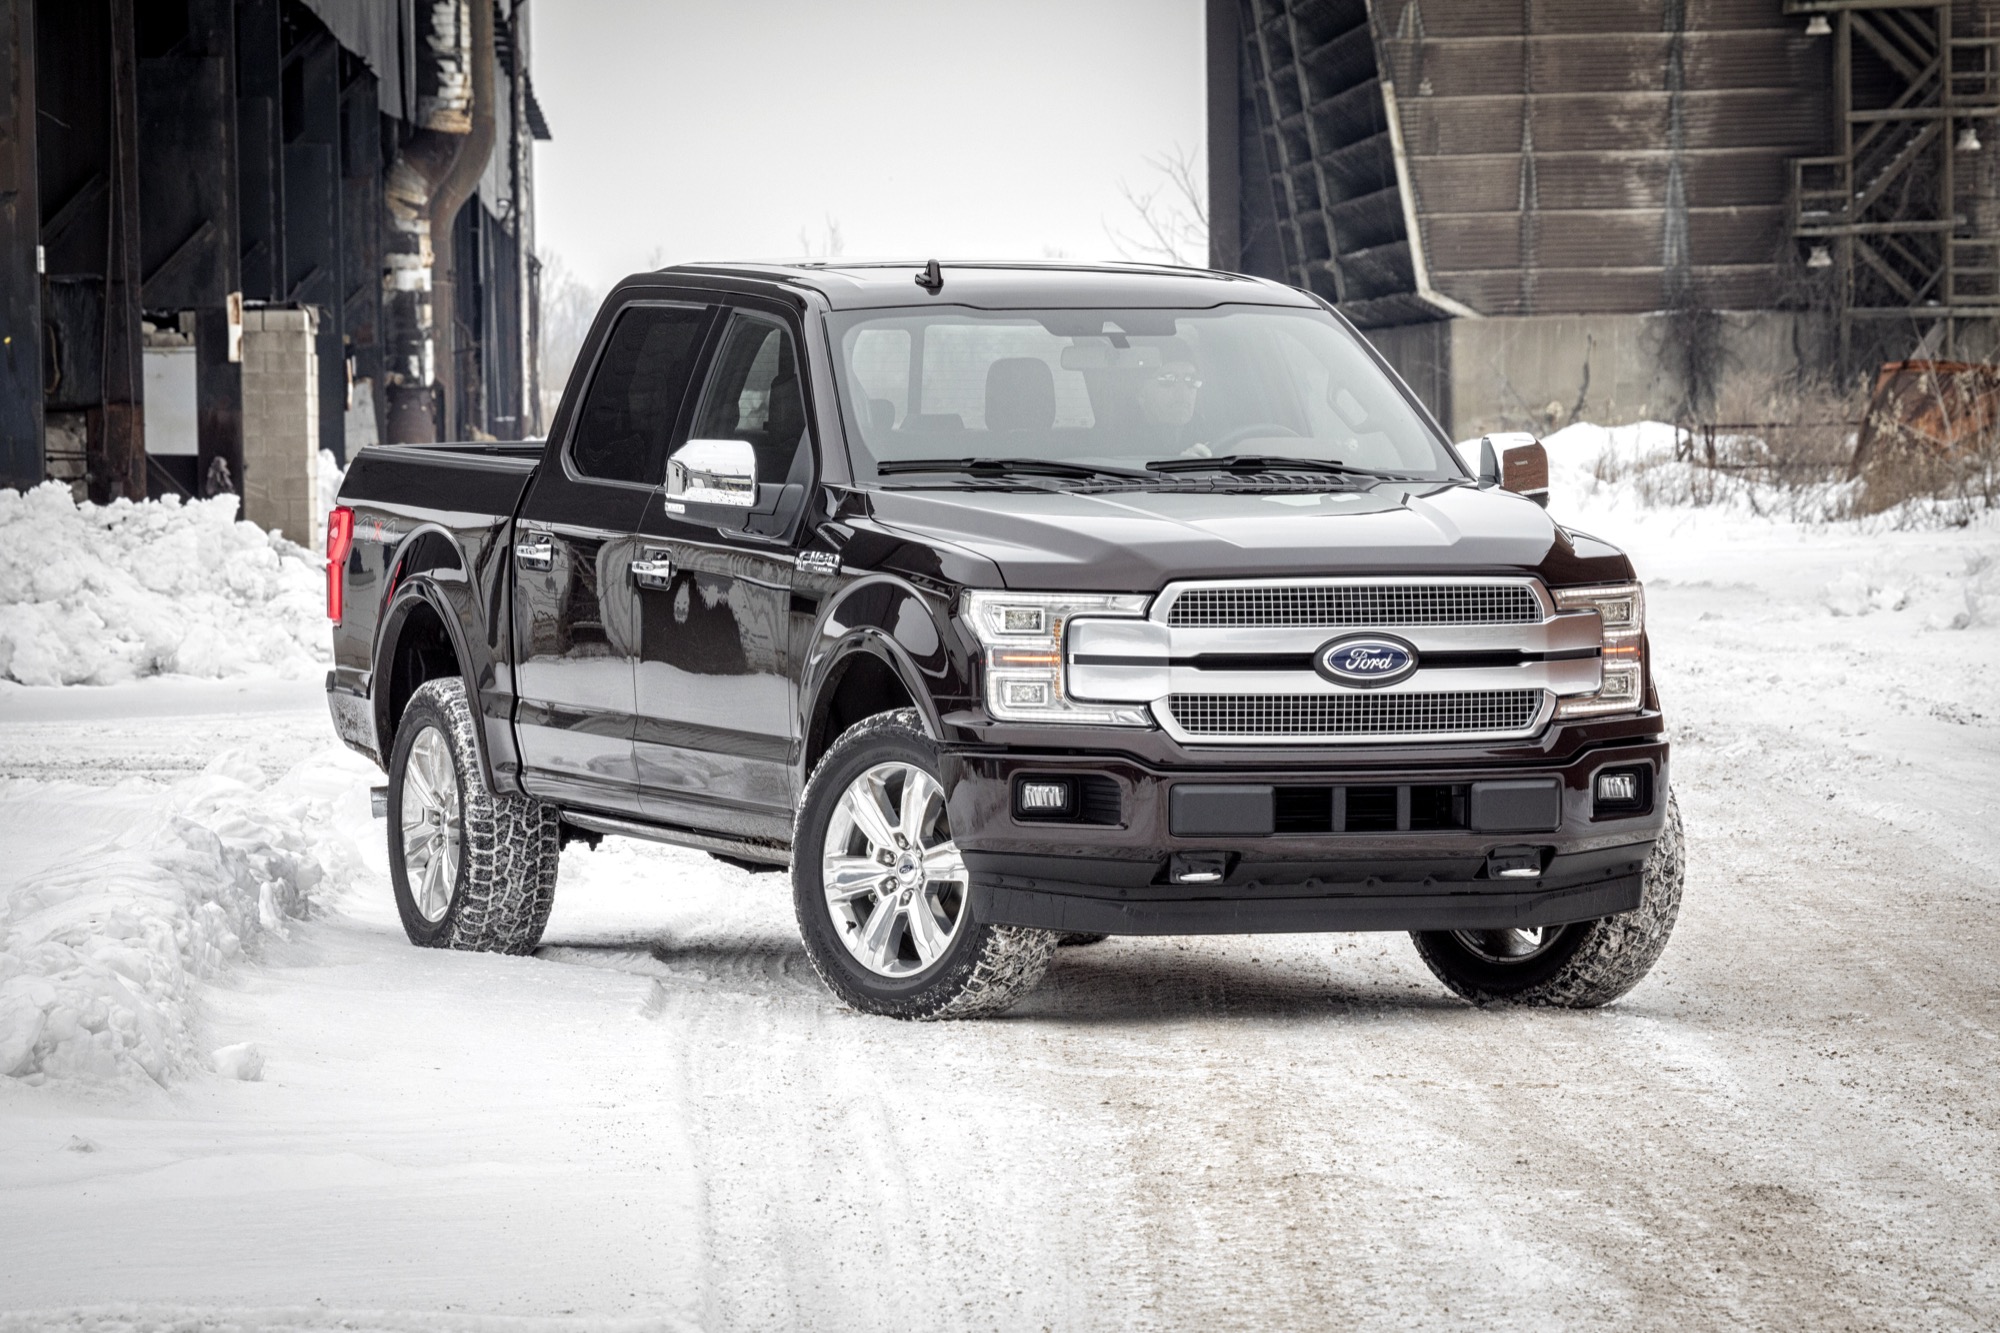 Ford Discount Drops 2019 F 150 Pickup Price By 12 000 For